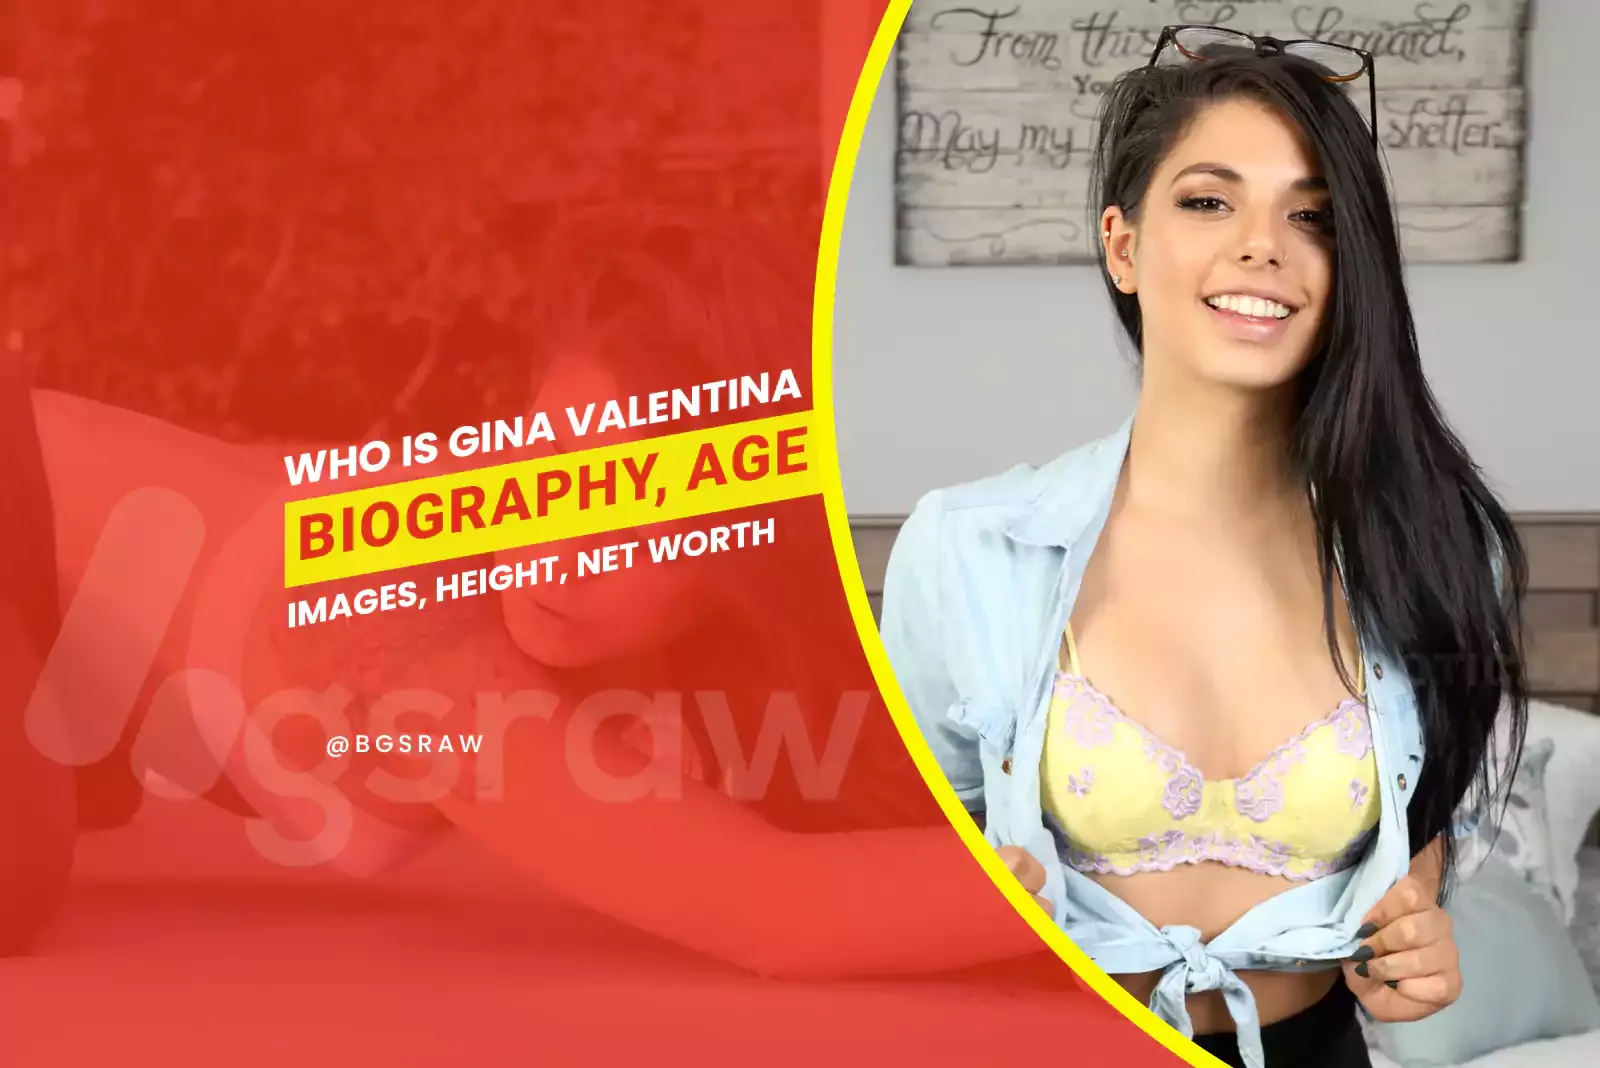 Who is Gina Valentina Biography, Age, Images, Height, Net Worth